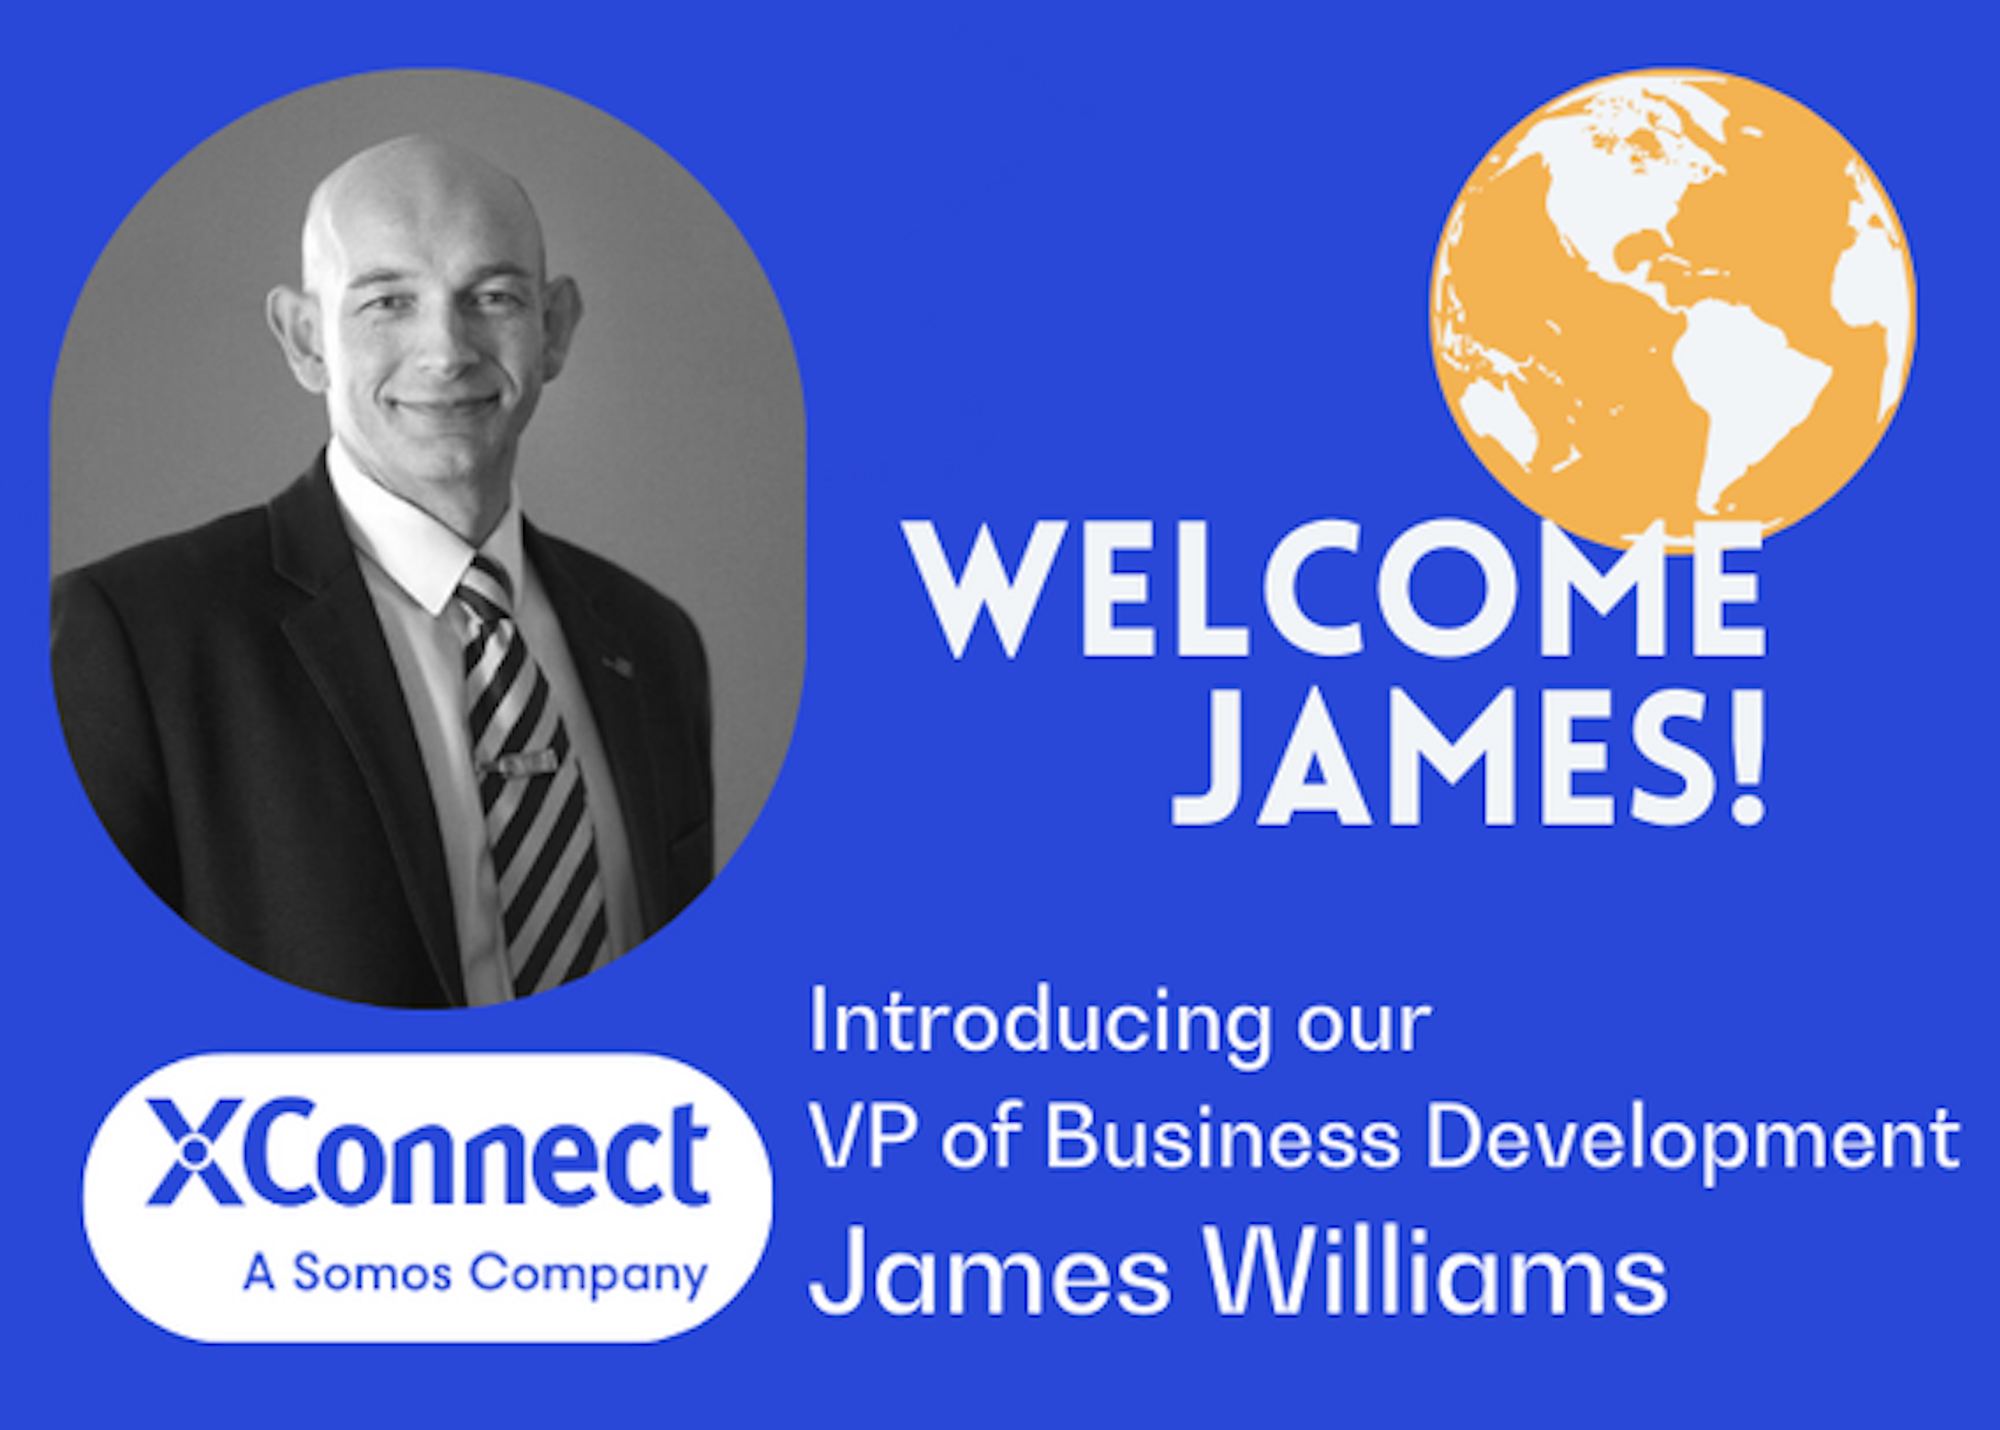 XConnect Appoints James Williams as VP of Business Development to Expand its Reach Across Global Markets and Segments